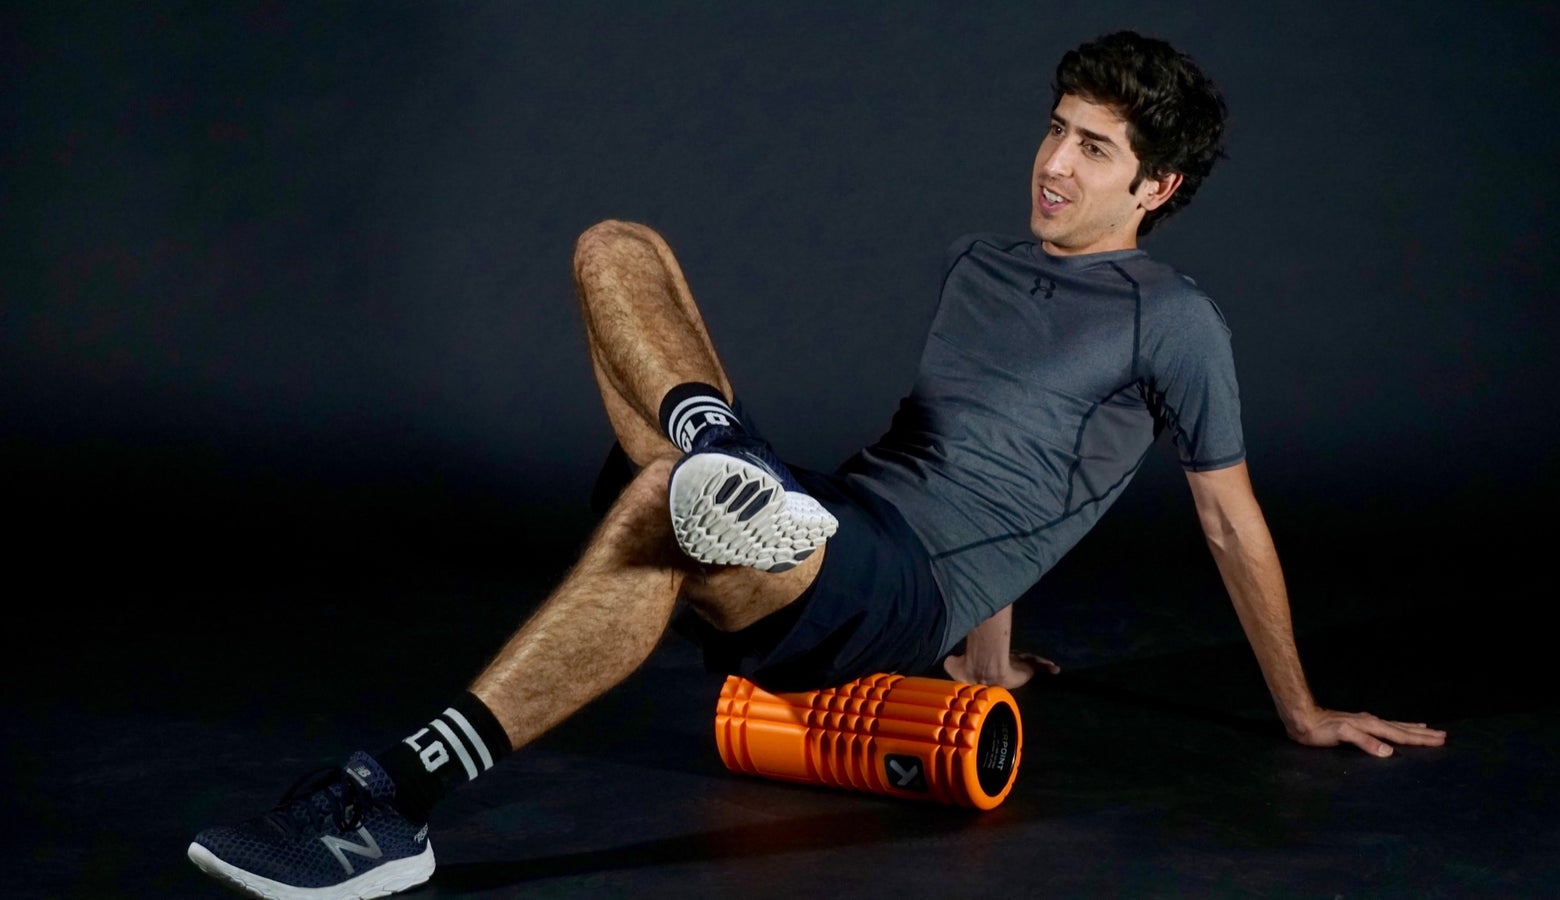 Foam rolling the glutes and hips